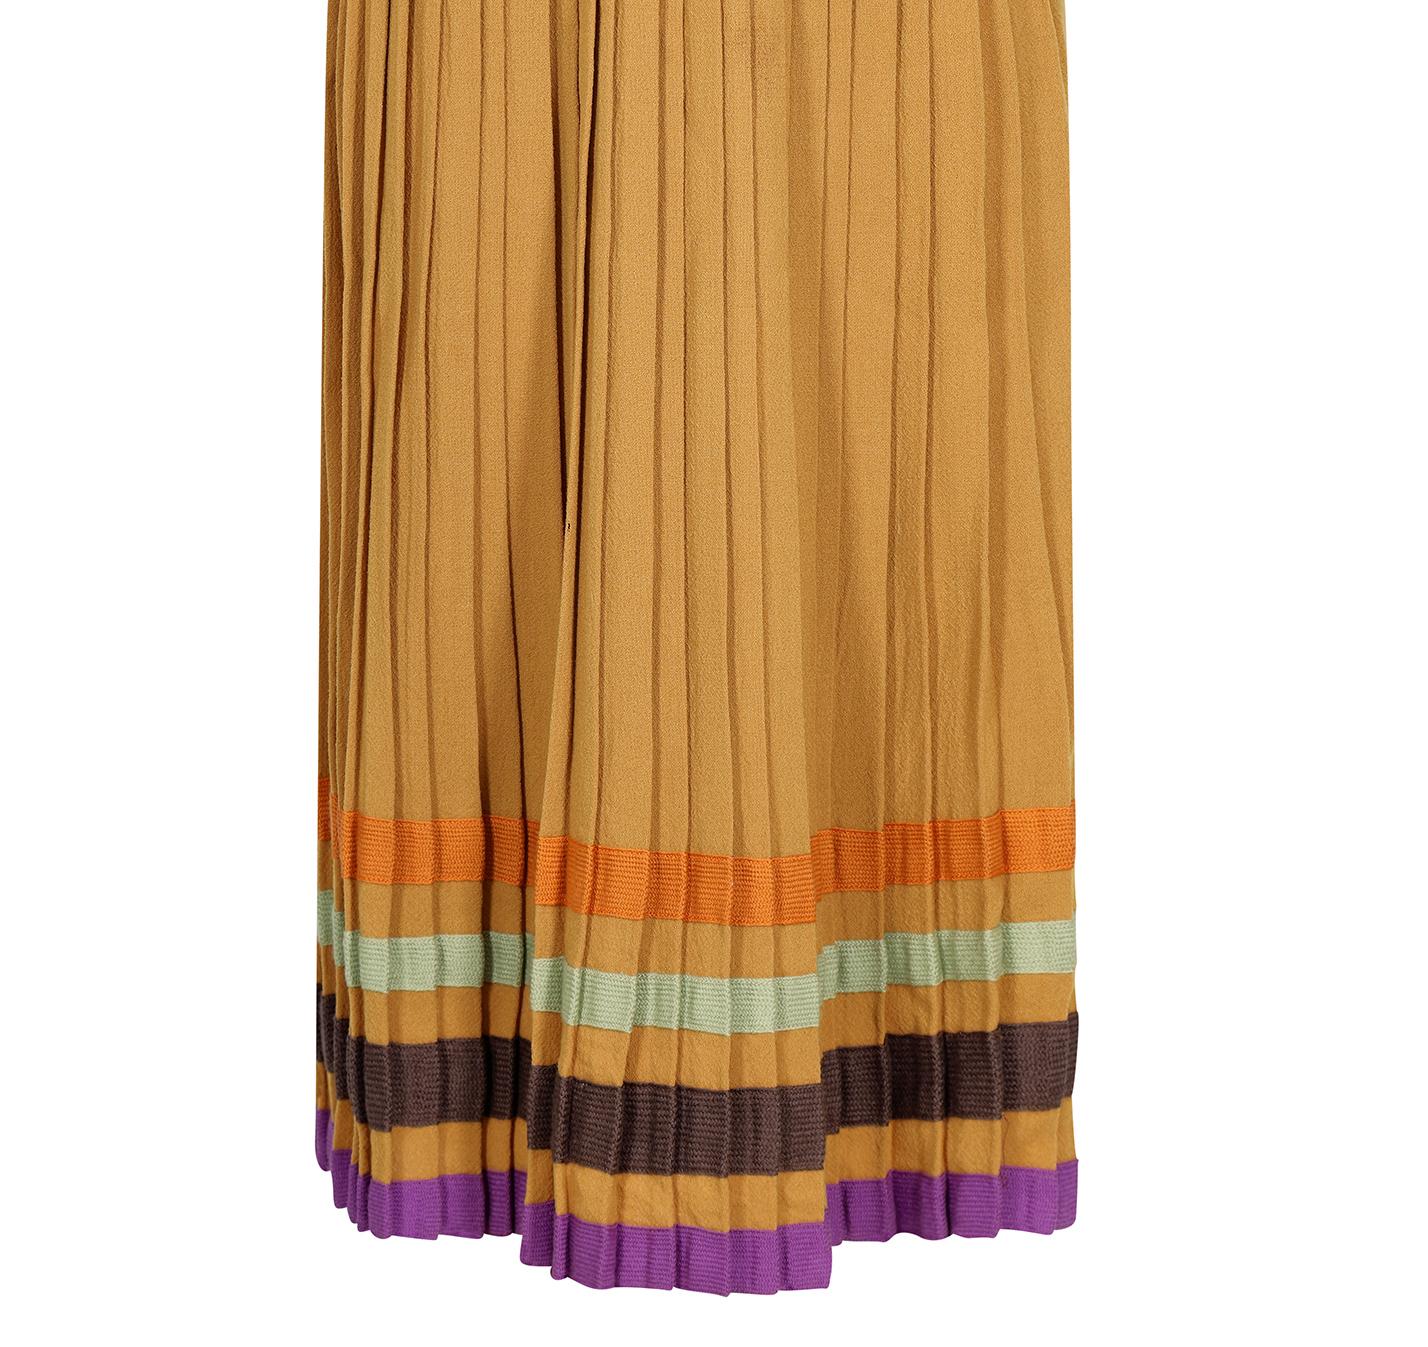 Bill Gibb 1970s Accordion Pleat Wool Skirt In Excellent Condition For Sale In London, GB